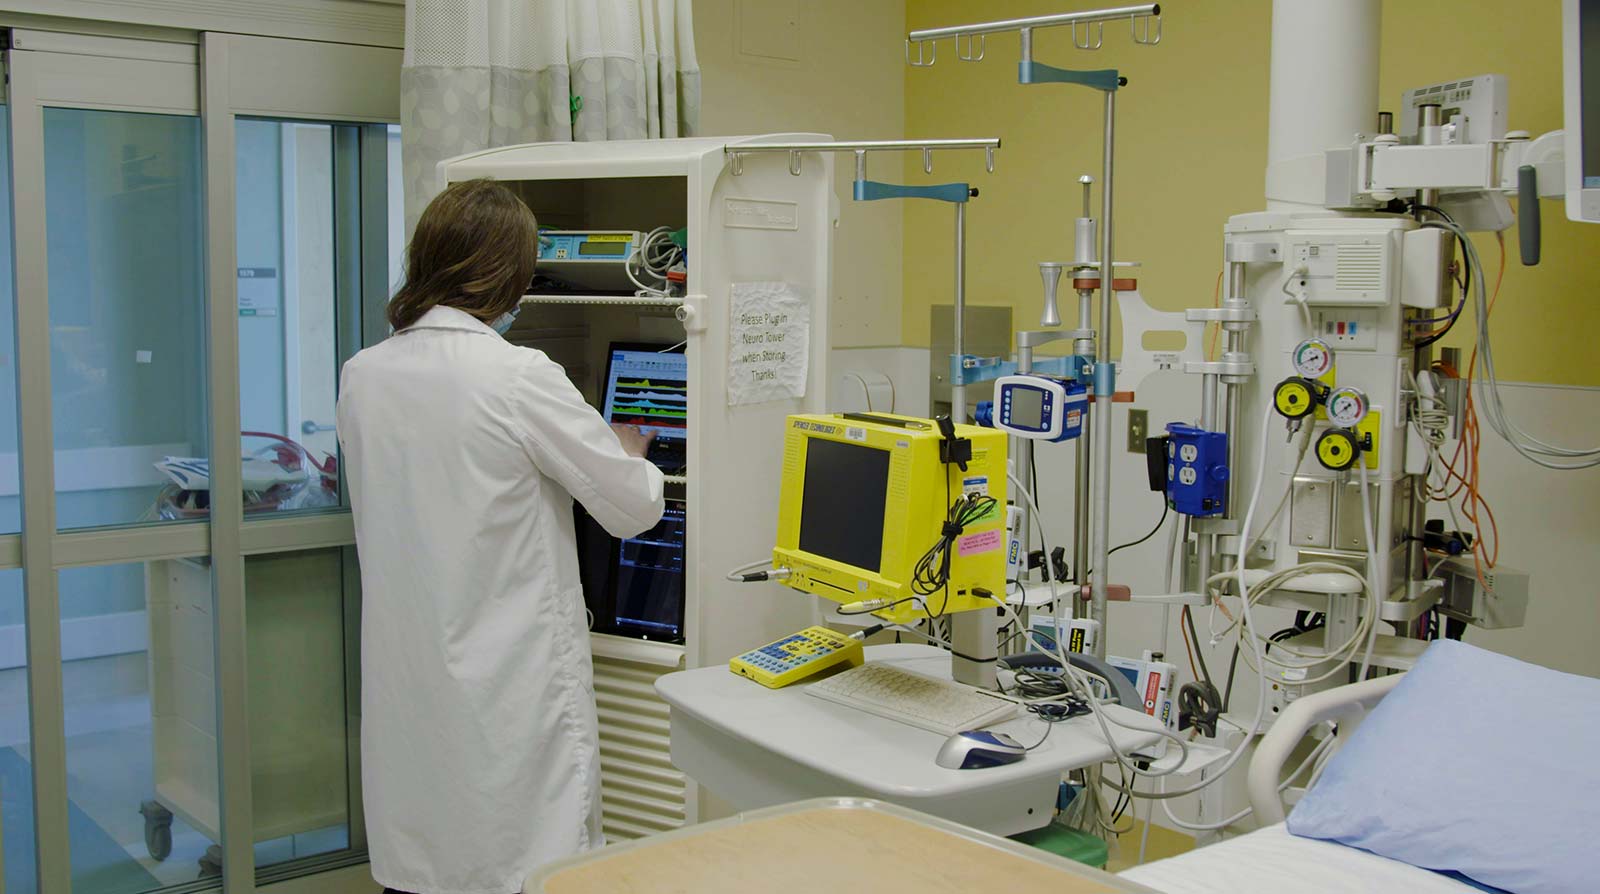 Health care worker in a room with many machines and working on a computer